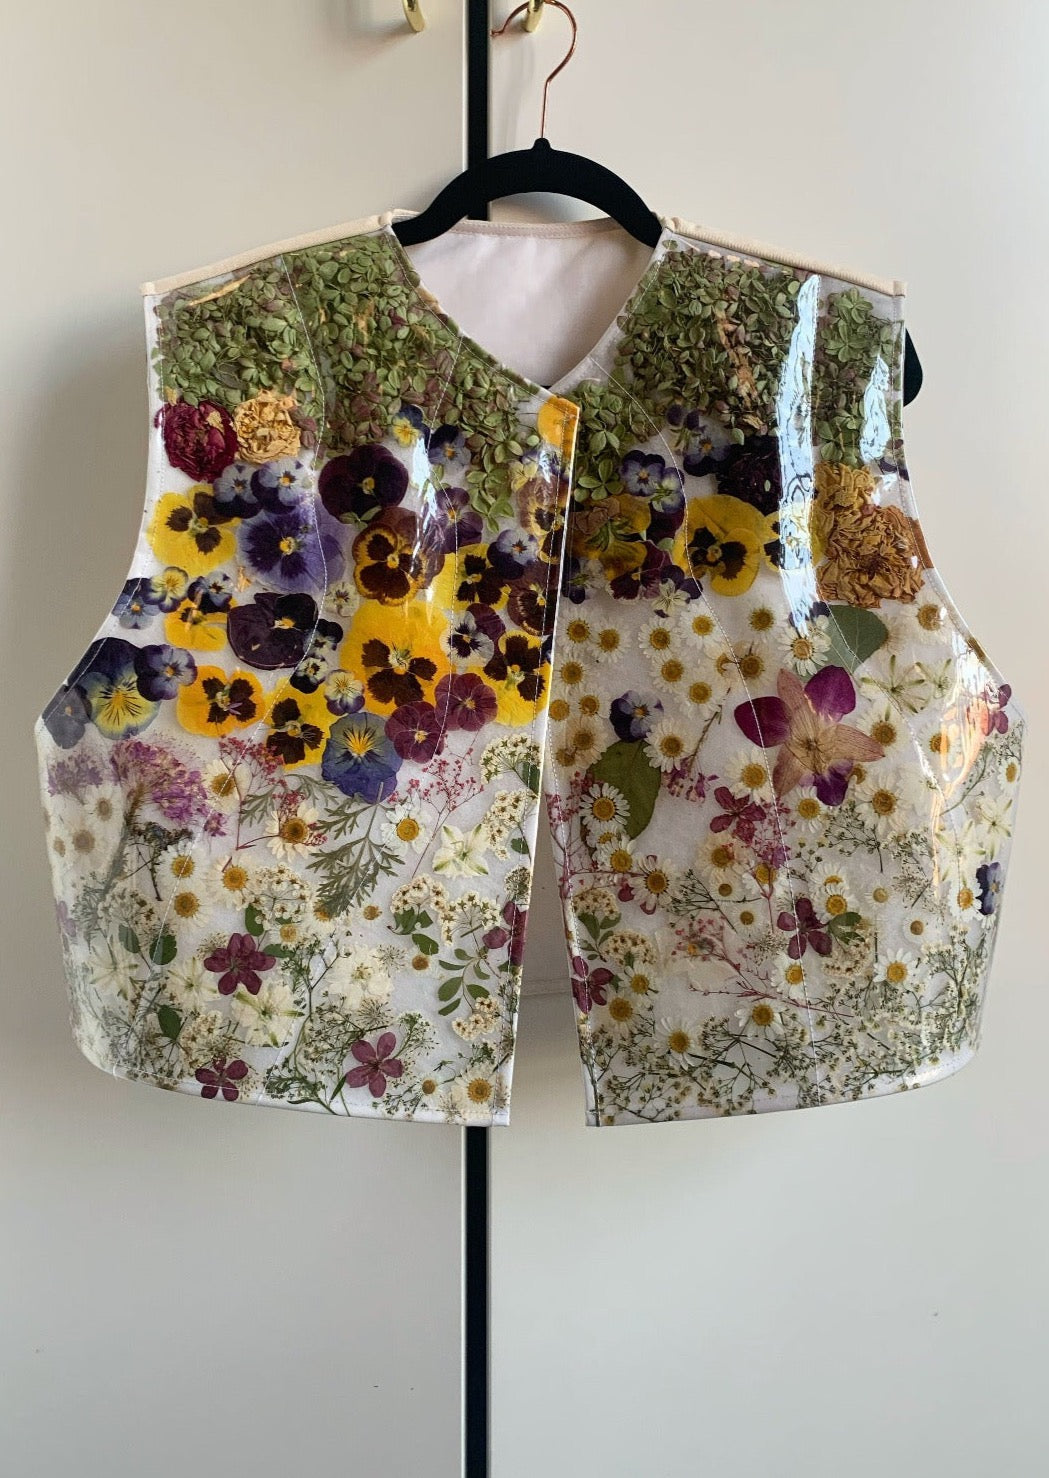 Puffer vest filled with approximately 1,000 real flowers-- everything from peonies to hydrangeas to pansies.